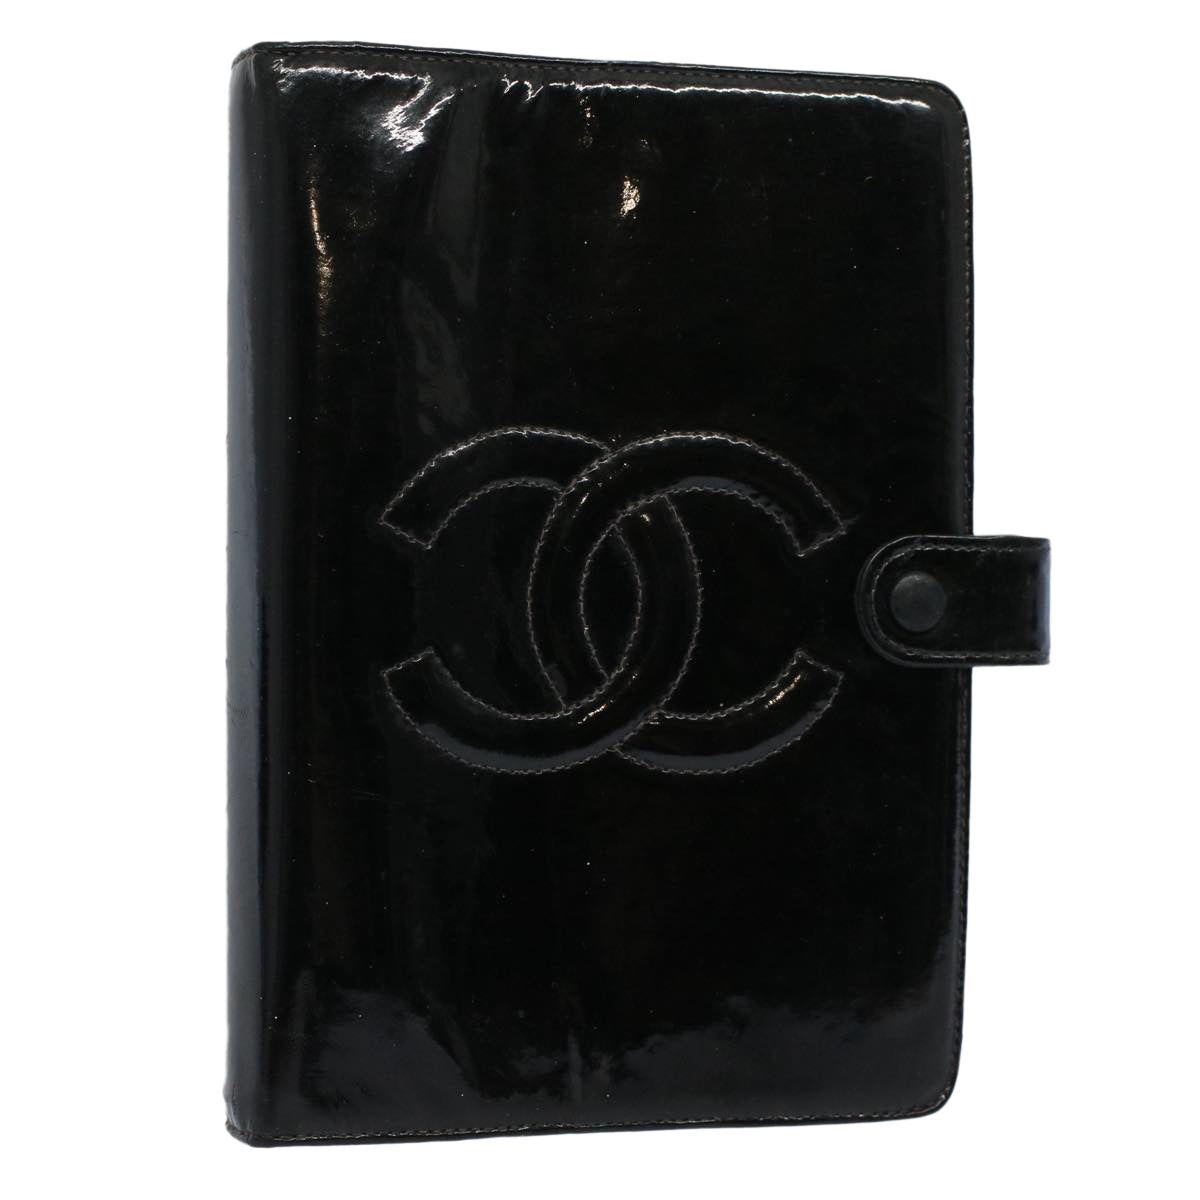 CHANEL Agenda Day Planner Cover Patent leather Black CC Auth bs9755